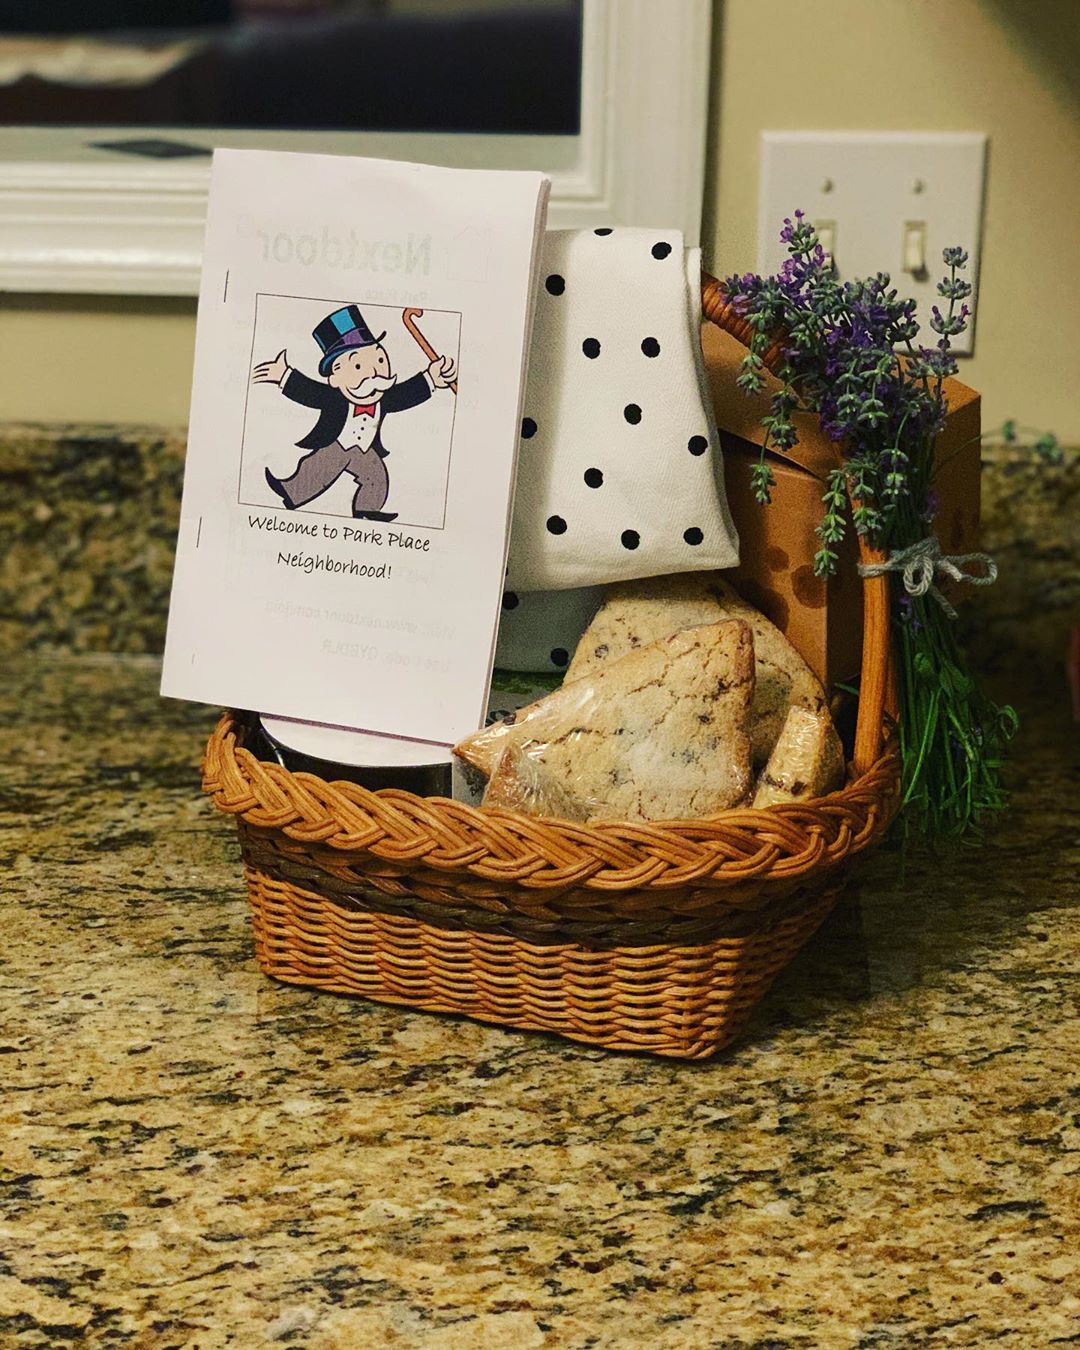 Resource gift basket for neighbors. Photo by Instagram user @mpower1971